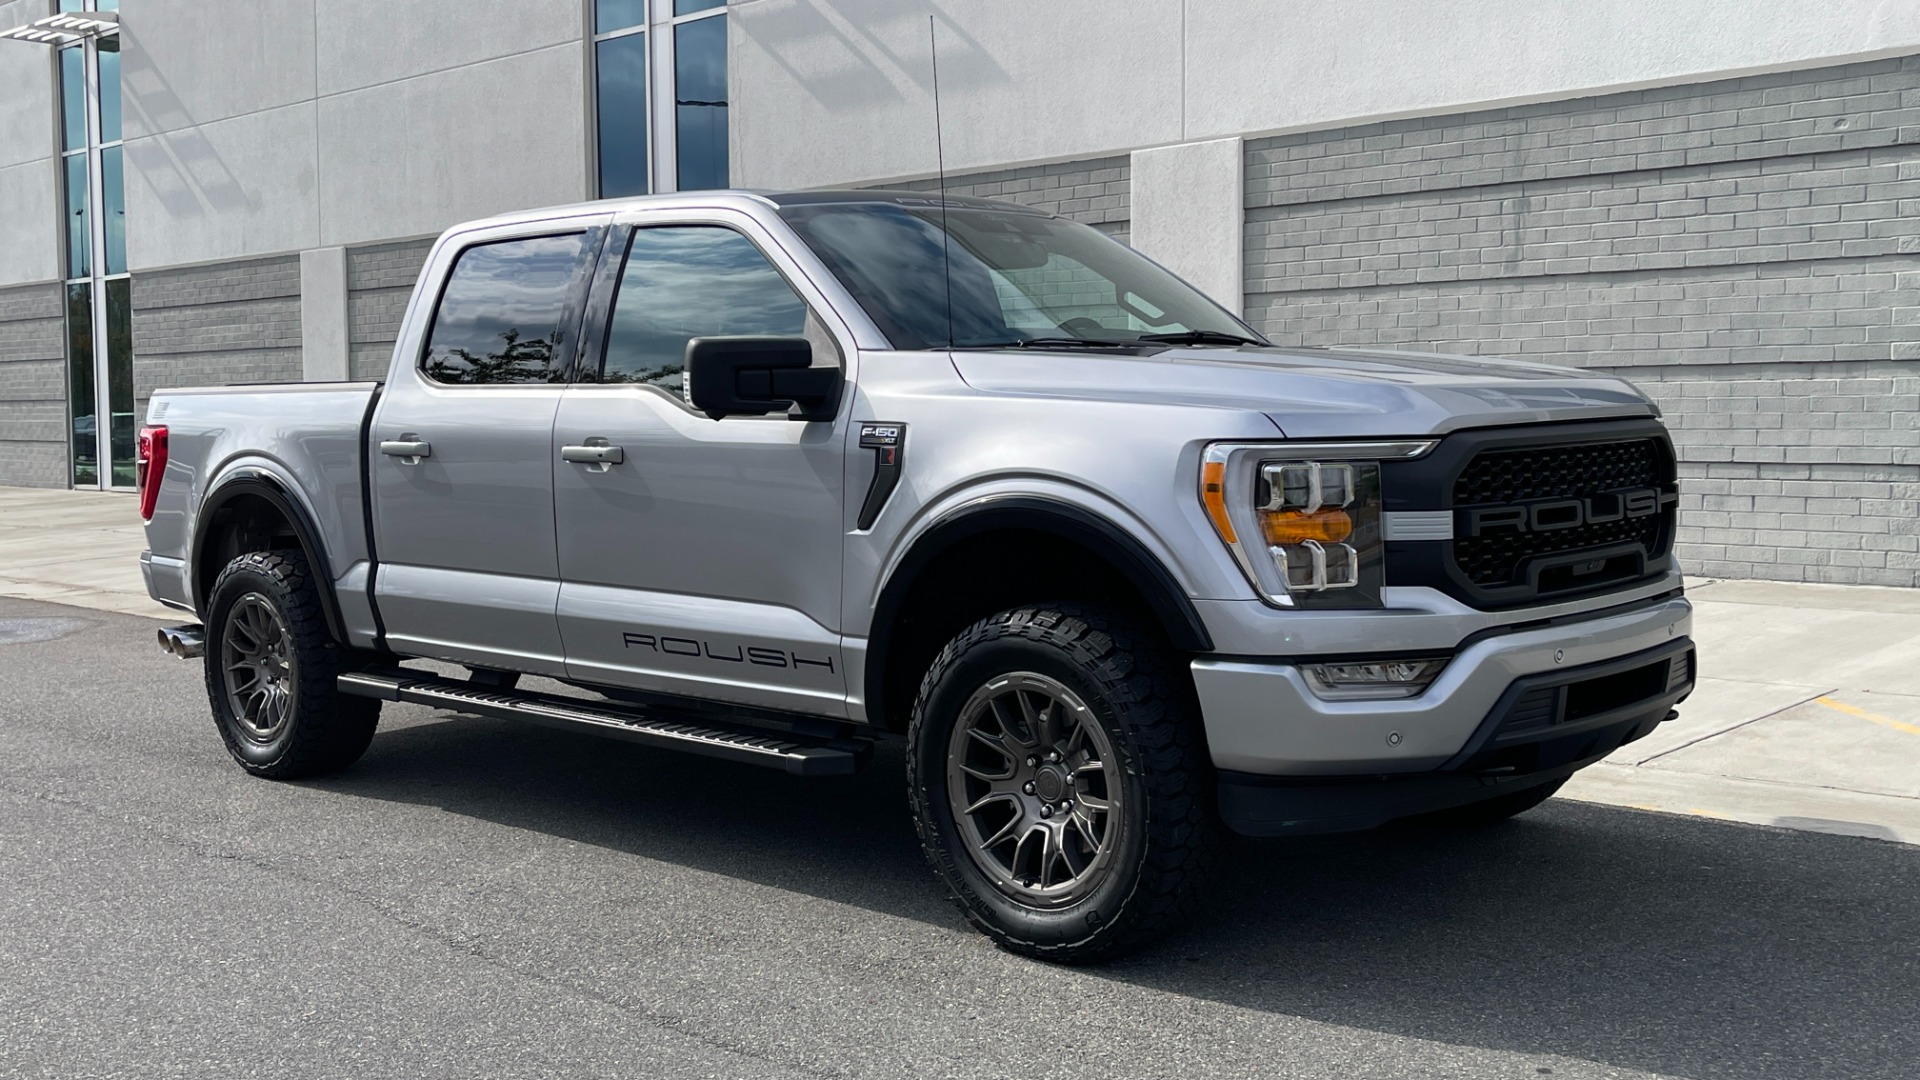 Used 2021 Ford F-150 ROUSH / 5.0 V8 / LEATHER / ACTIVE EXHAUST / FOX SHOCKS / CONSOLE SAFE for sale $69,985 at Formula Imports in Charlotte NC 28227 6